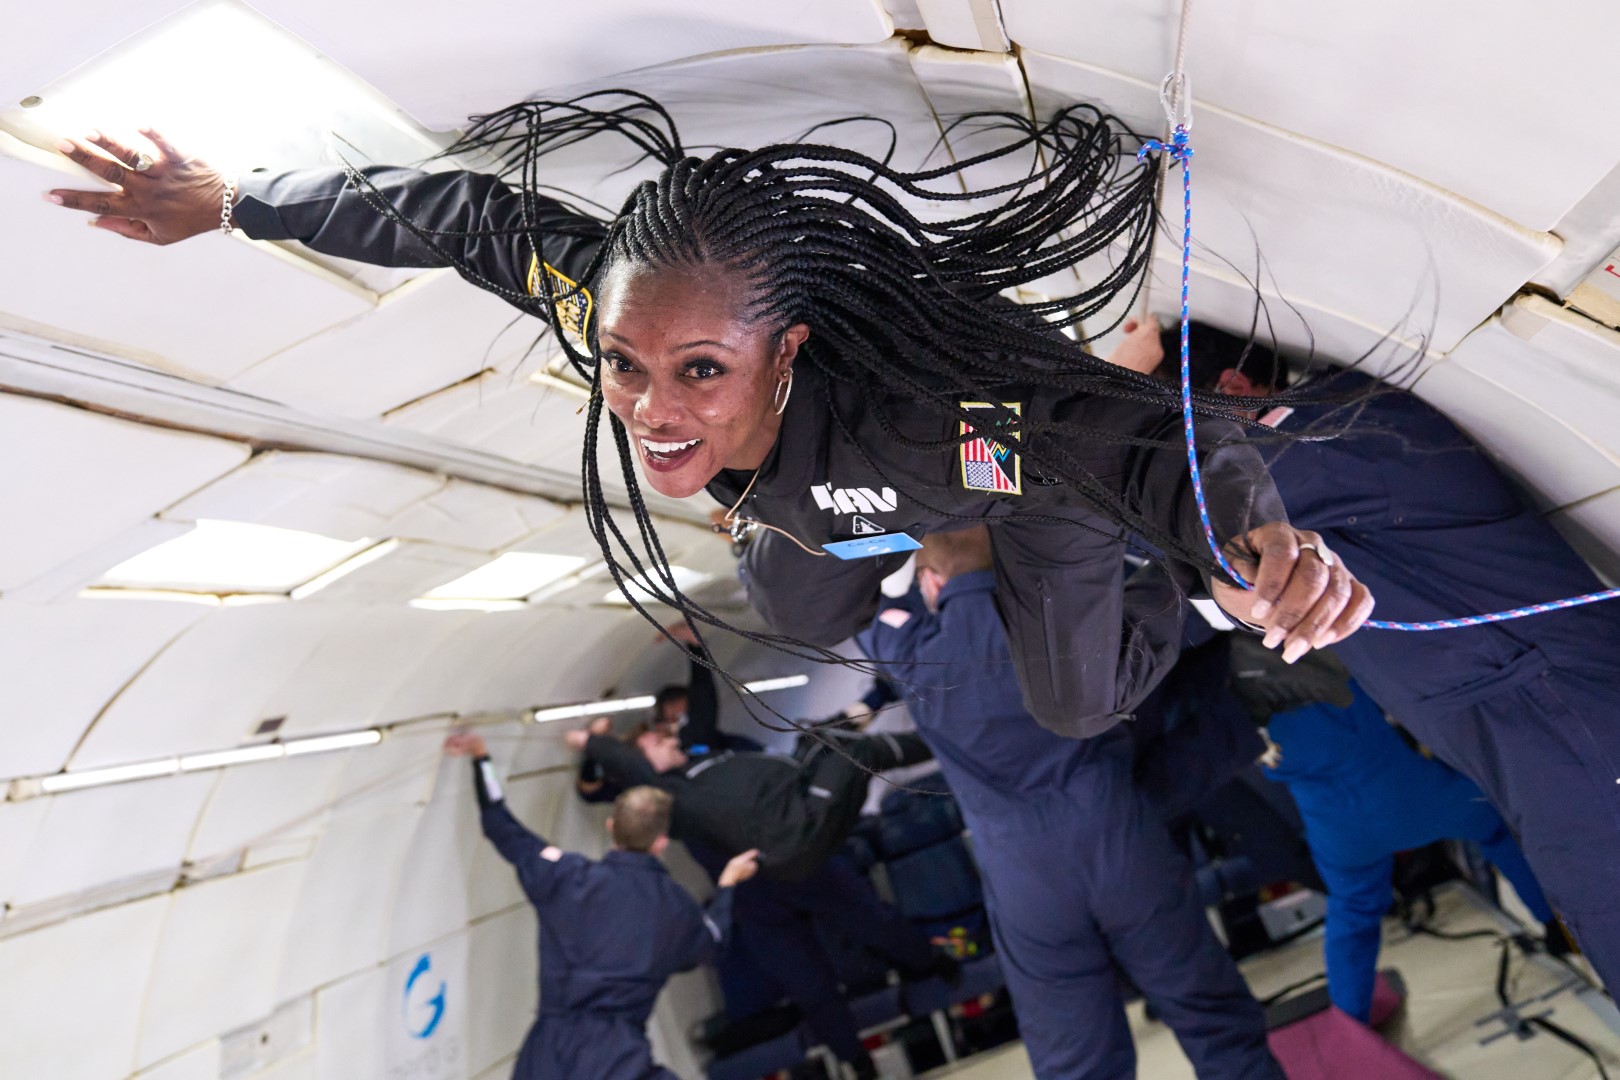 Featured image for “AstroAccess announces second Zero-G Parabolic Flight for 2022”